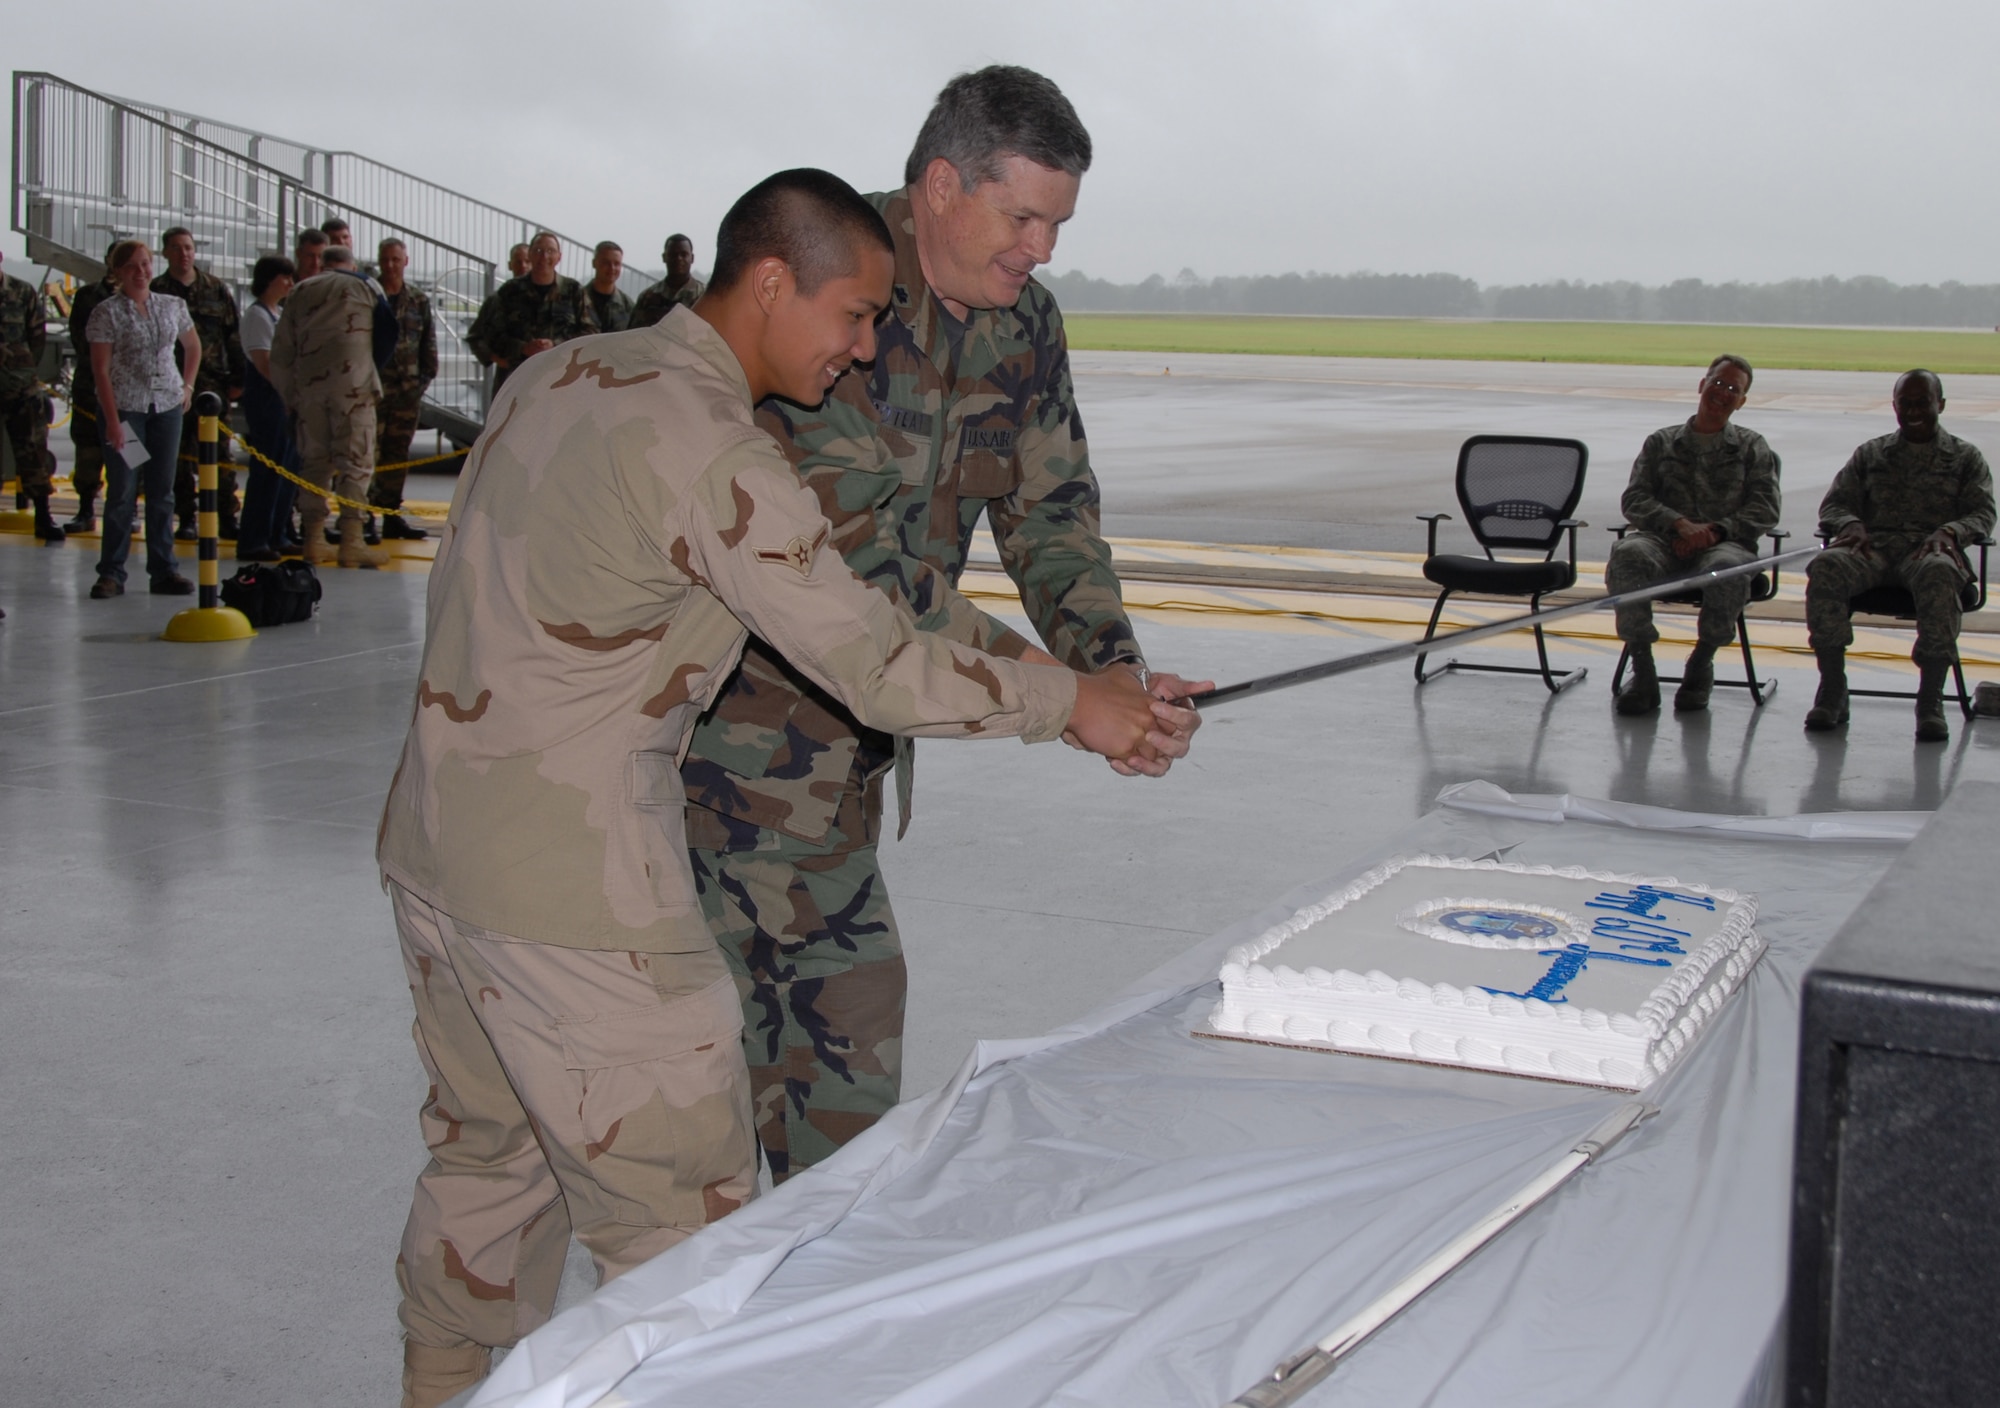 To recognize where the Air Force Reserve has come from and where they're going, the oldest and youngest member of the 908th Airlift Wing, Lt. Col. Carl Poteat and Airman Tony Dinofrio, cut a cake with the seal of the Air Force Reserve Command painted in icing at Maxwell AFB, Ala., April 5. Along with celebrating the Air Force Reserve's diamond anniversary, the Montgomery, Ala.-based 908th AW honored Hank Williams by changing the unit's C-130 cargo planes' radio call sign to "Hank" and painting "Ramblin' Man" over the door of one of the aircraft.  (U.S. Air Force photo by Mr. Jeff Melvin)